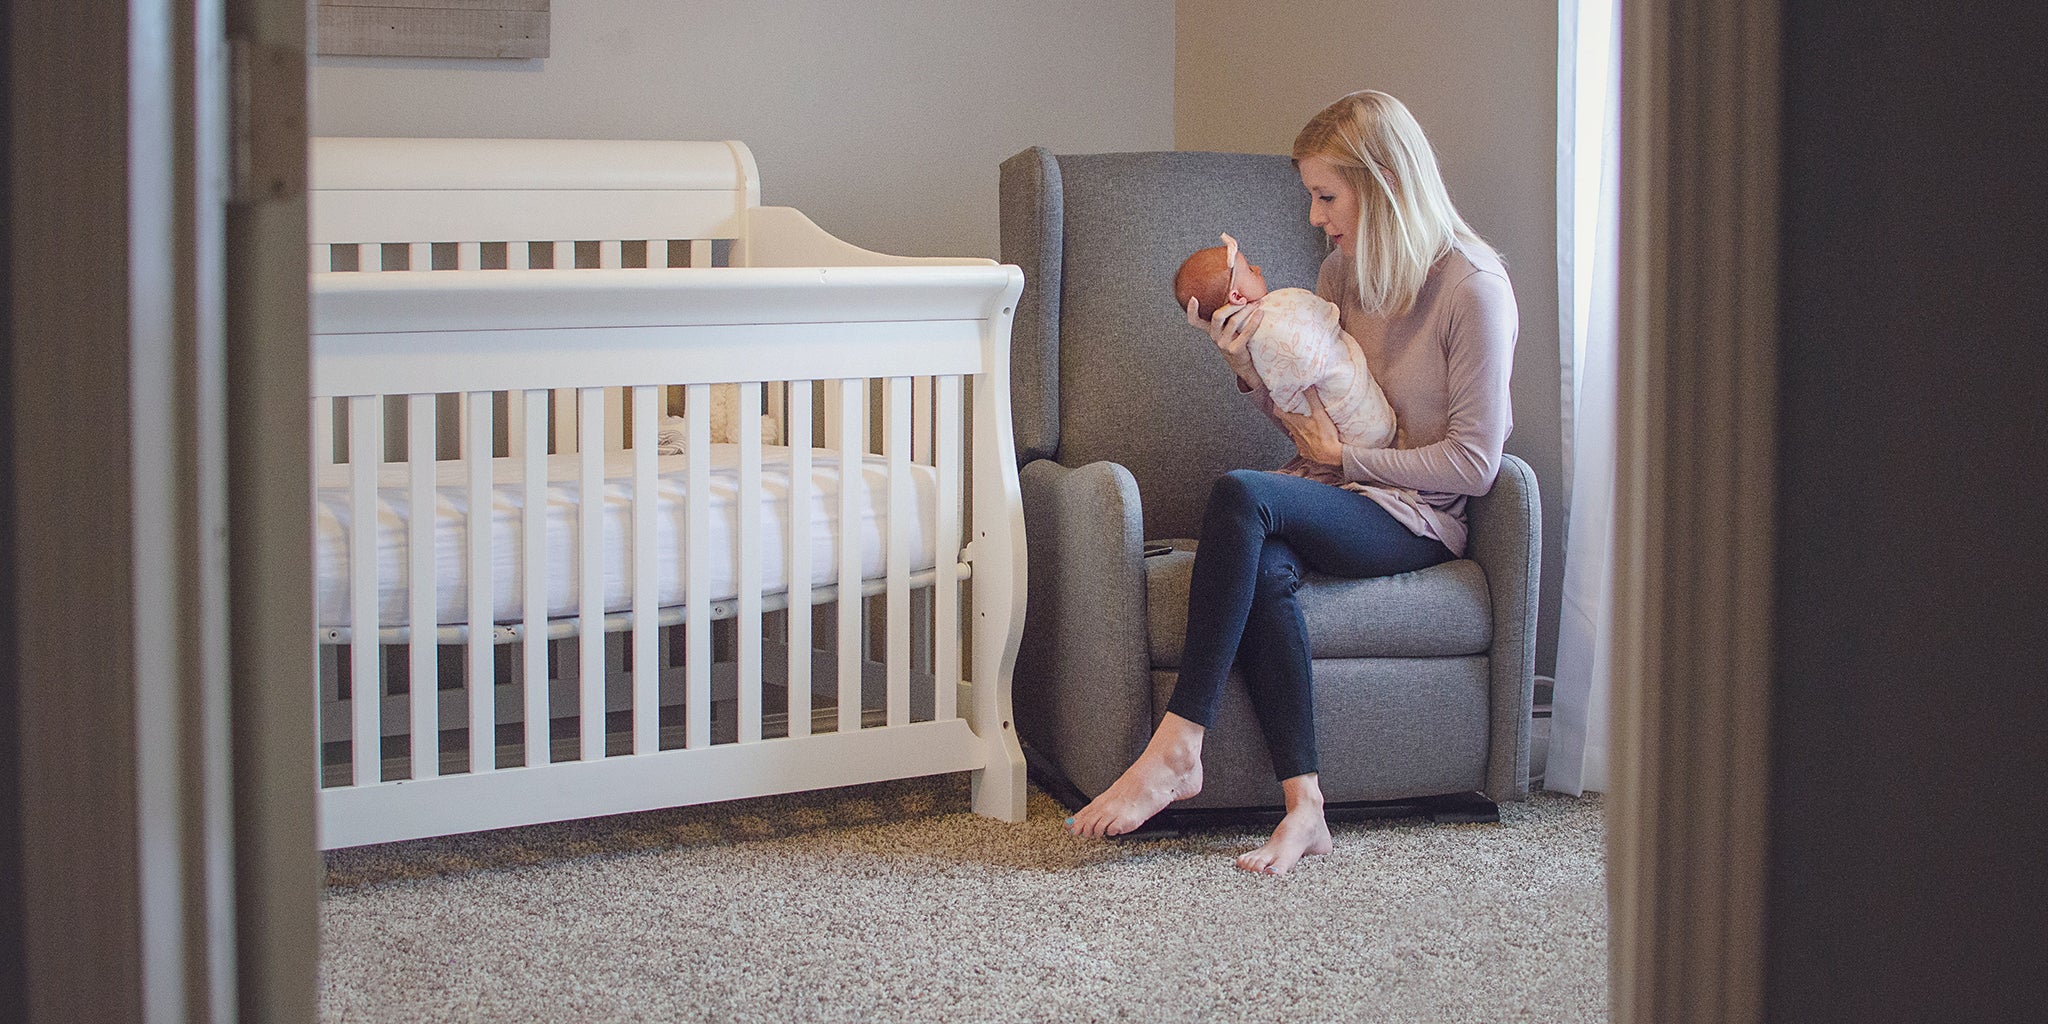 Nest Designs: A Guide to Baby Sleep